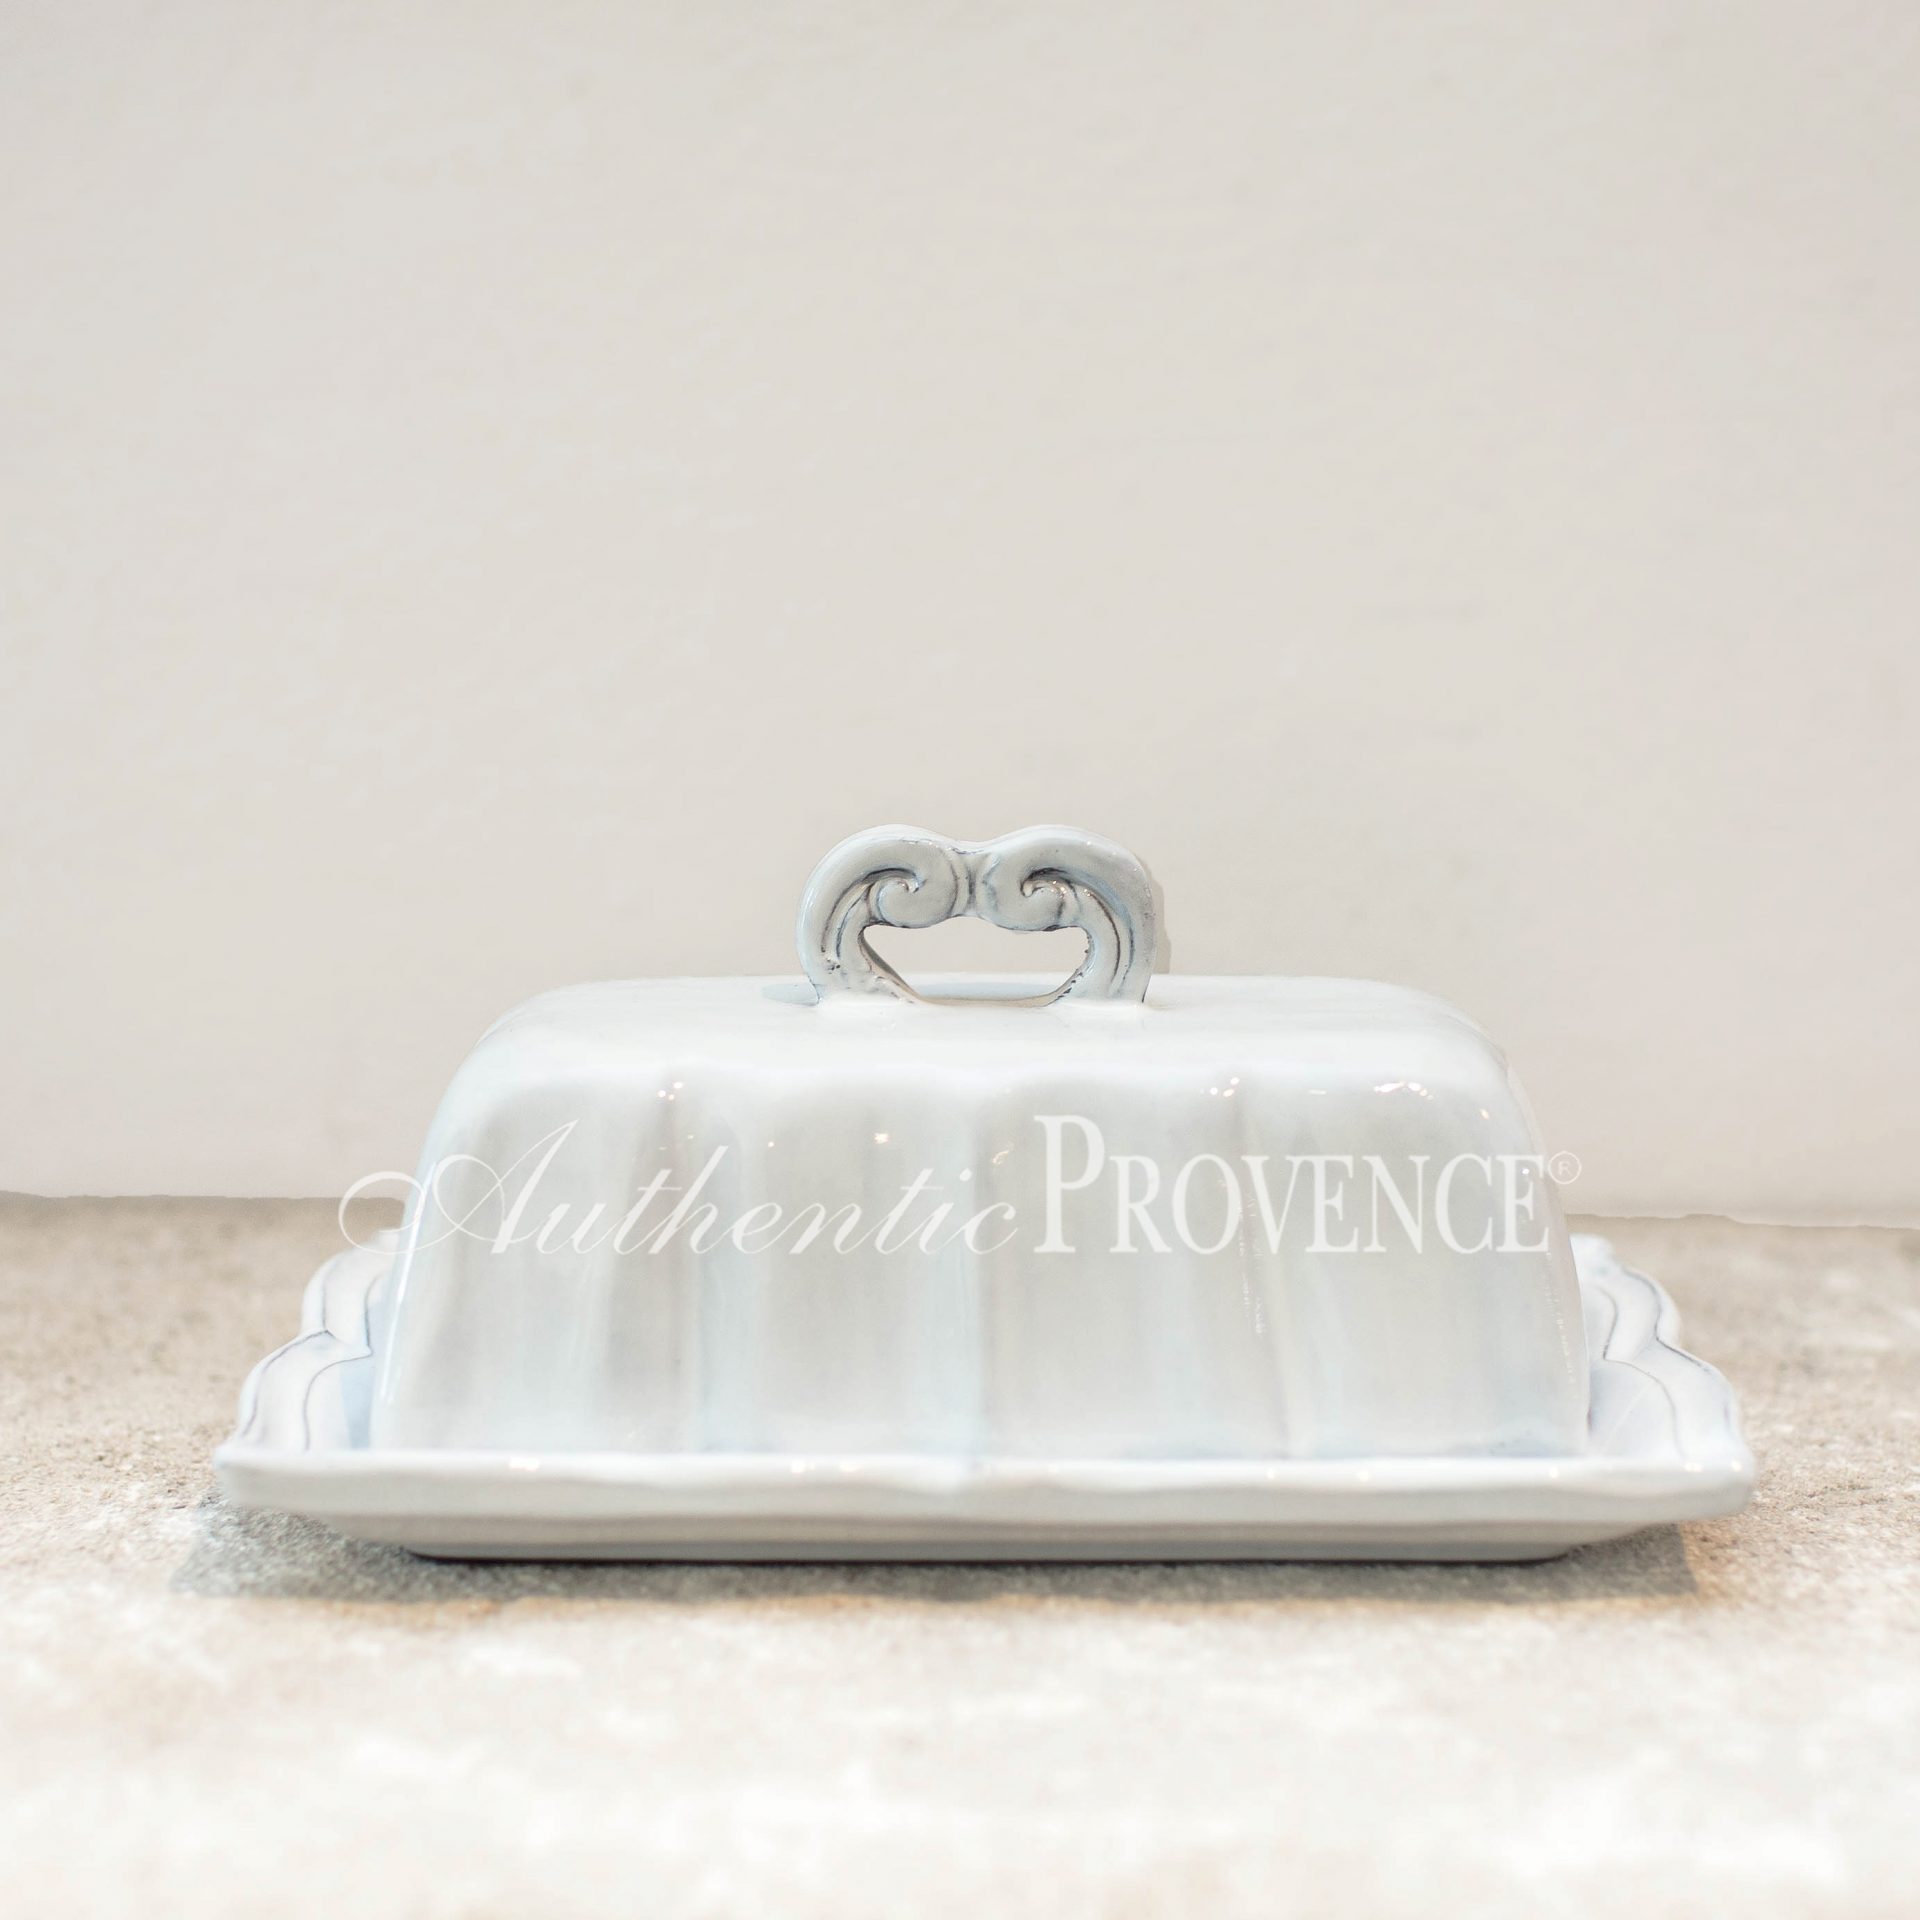 Authentic Provence